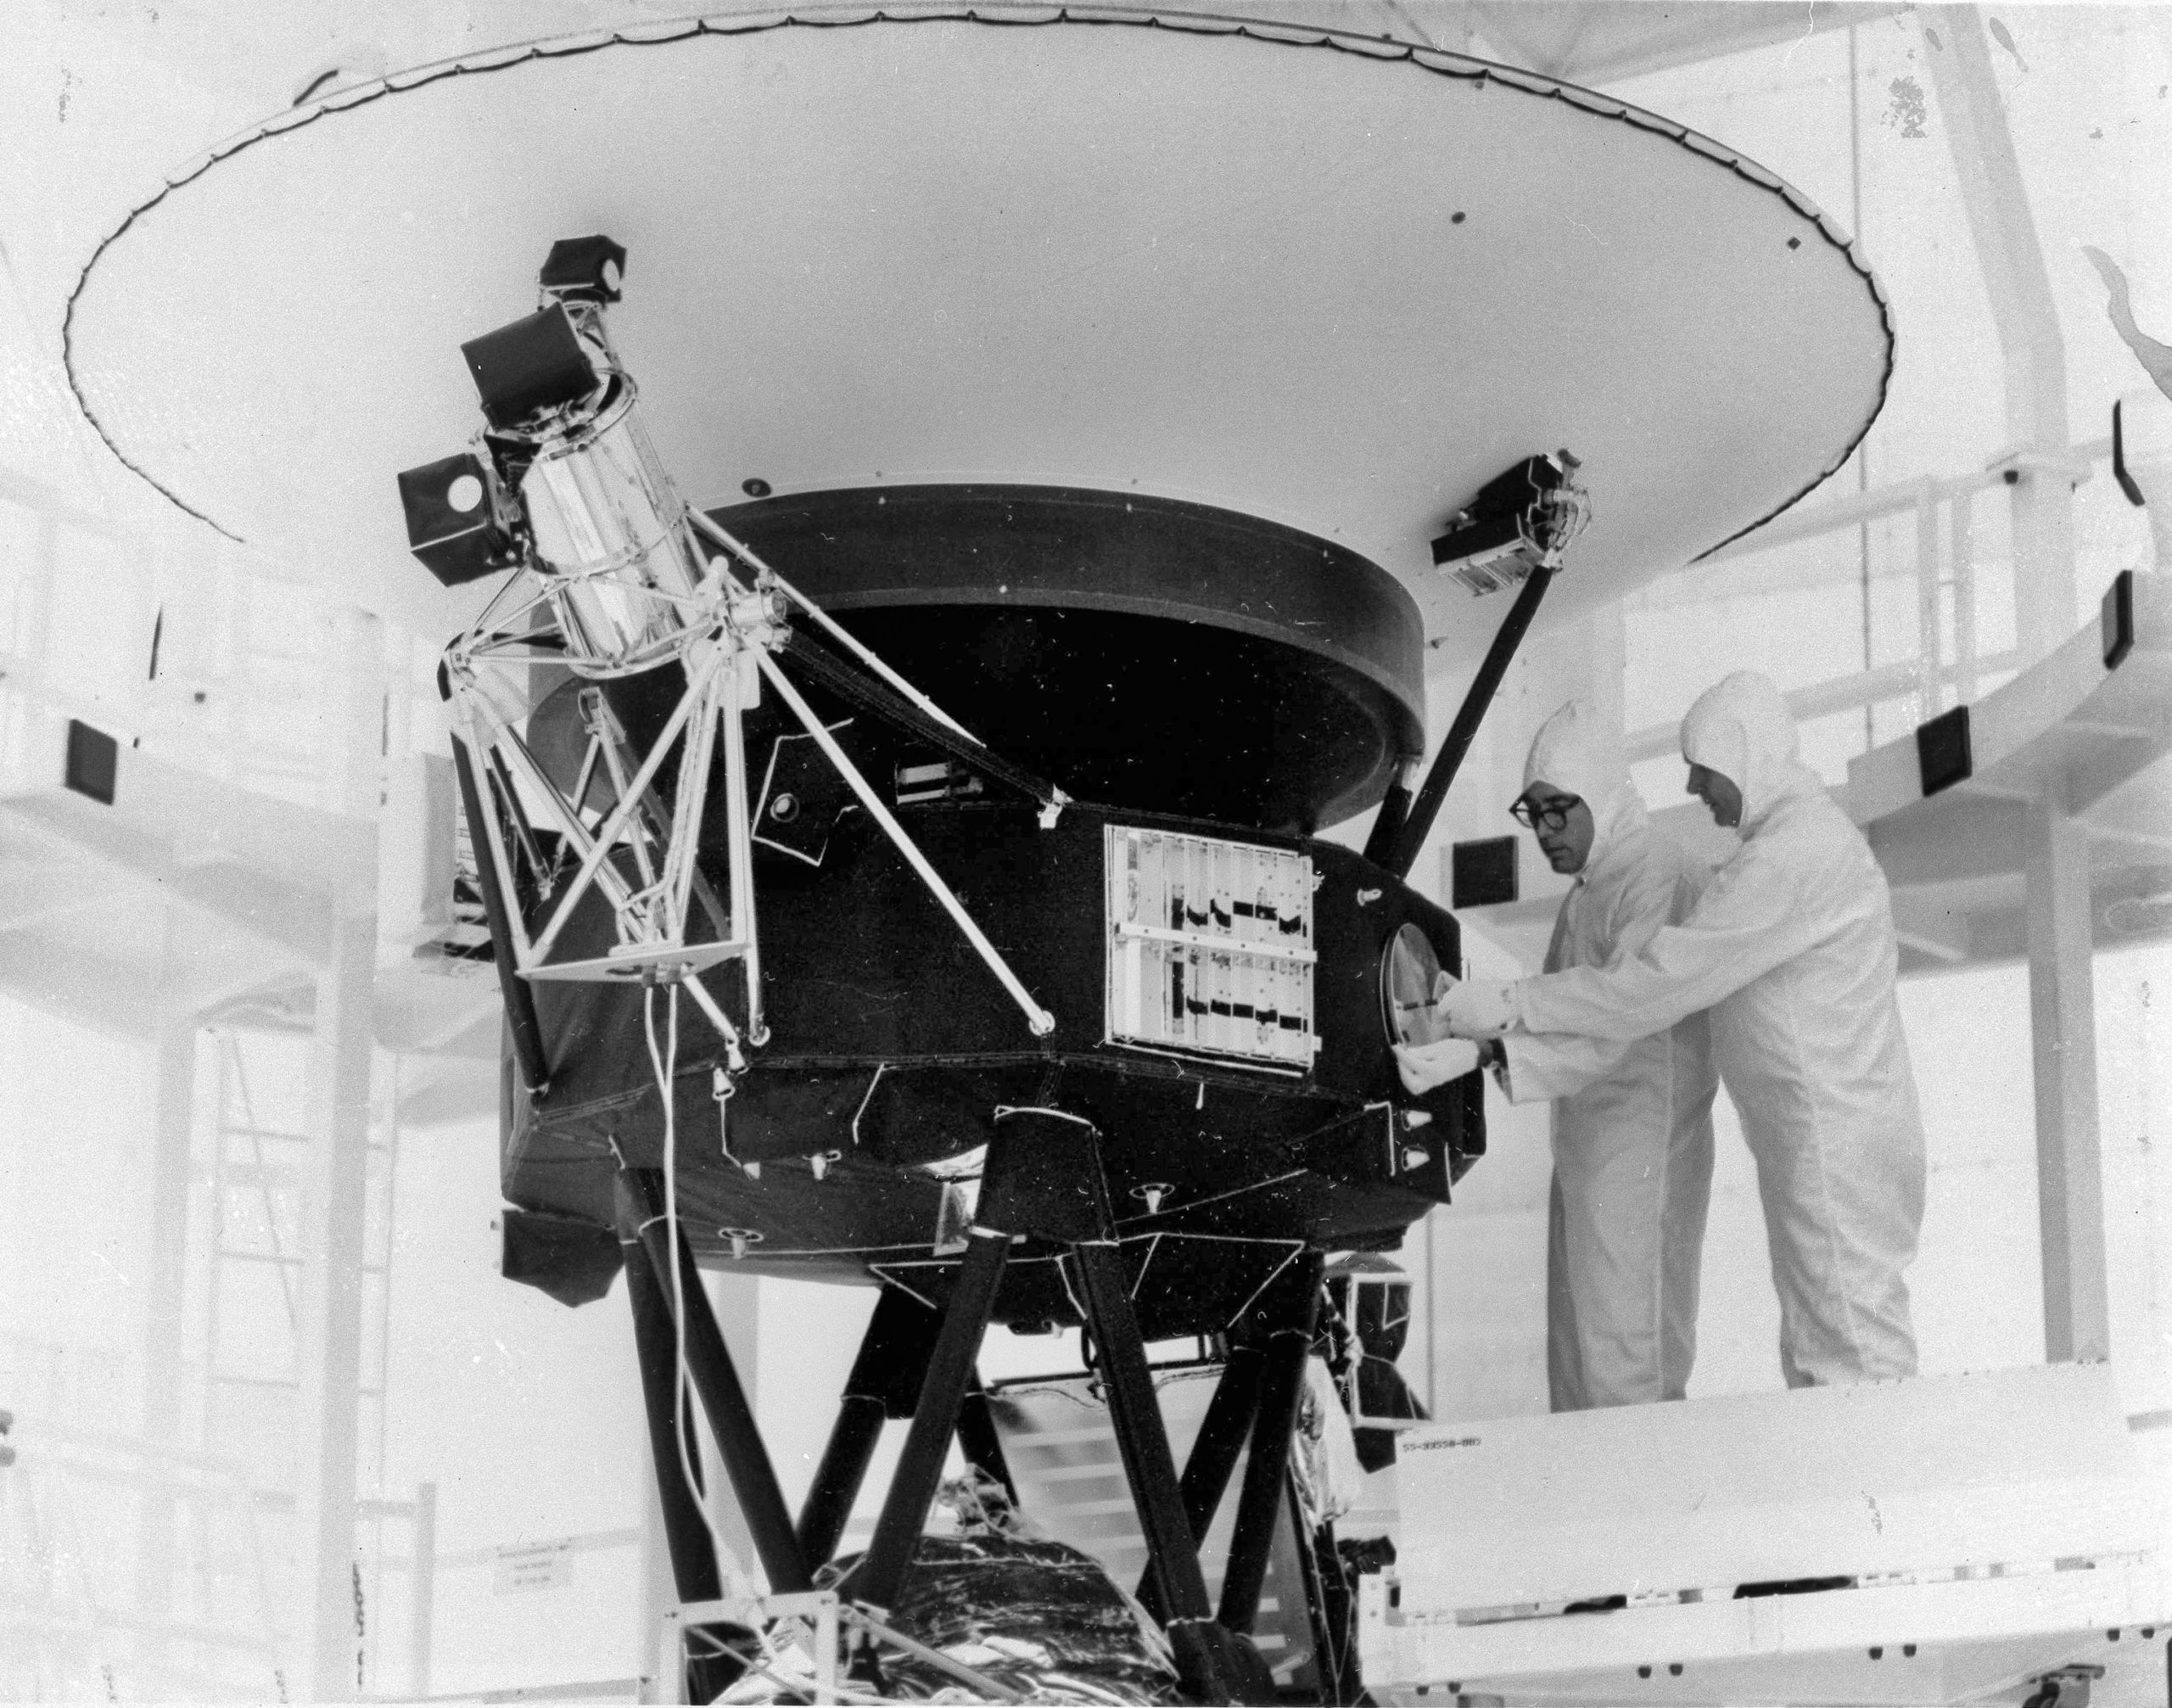 In this Aug. 4, 1977, the "Sounds of Earth" record is mounted on the Voyager 2 spacecraft in the Safe-1 Building at the Kennedy Space Center in Florida prior to encapsulation in the protective shroud.